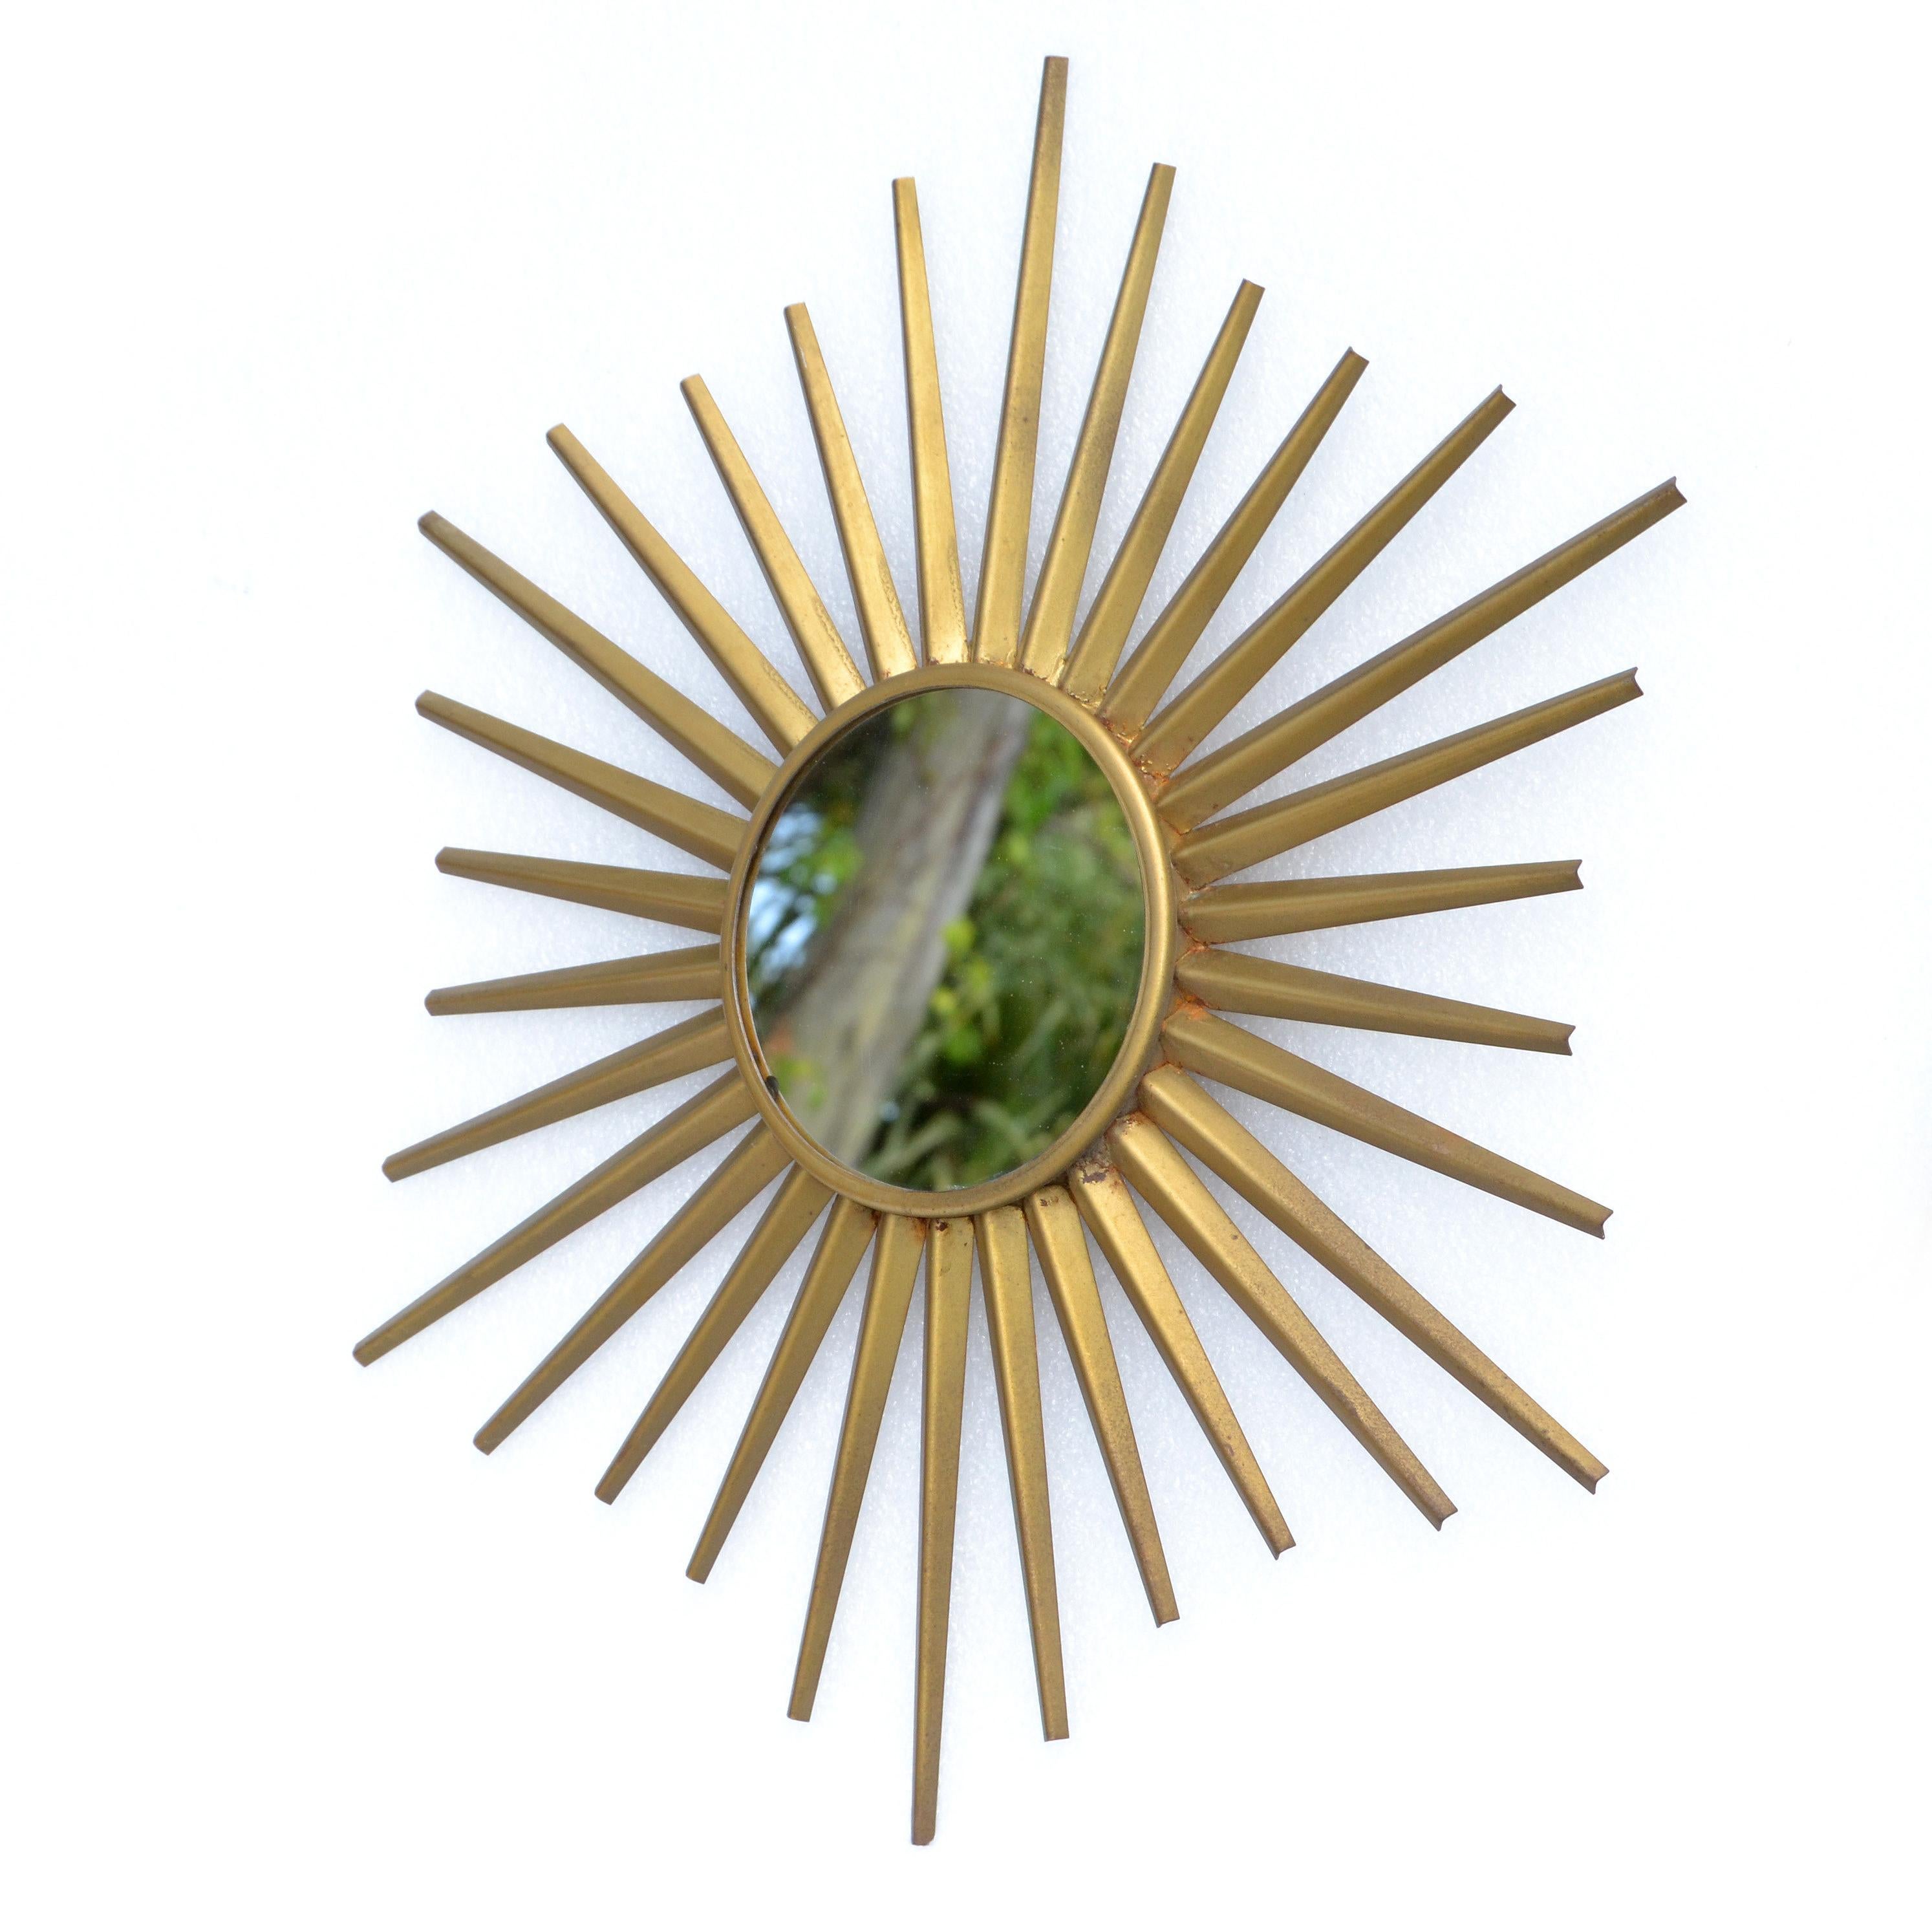 1950s French Mid-Century Modern handcrafted gold finish iron sunburst mirror.
The round flat mirror in the center measures 5.25 inches in diameter.
Backing is made out of wood.